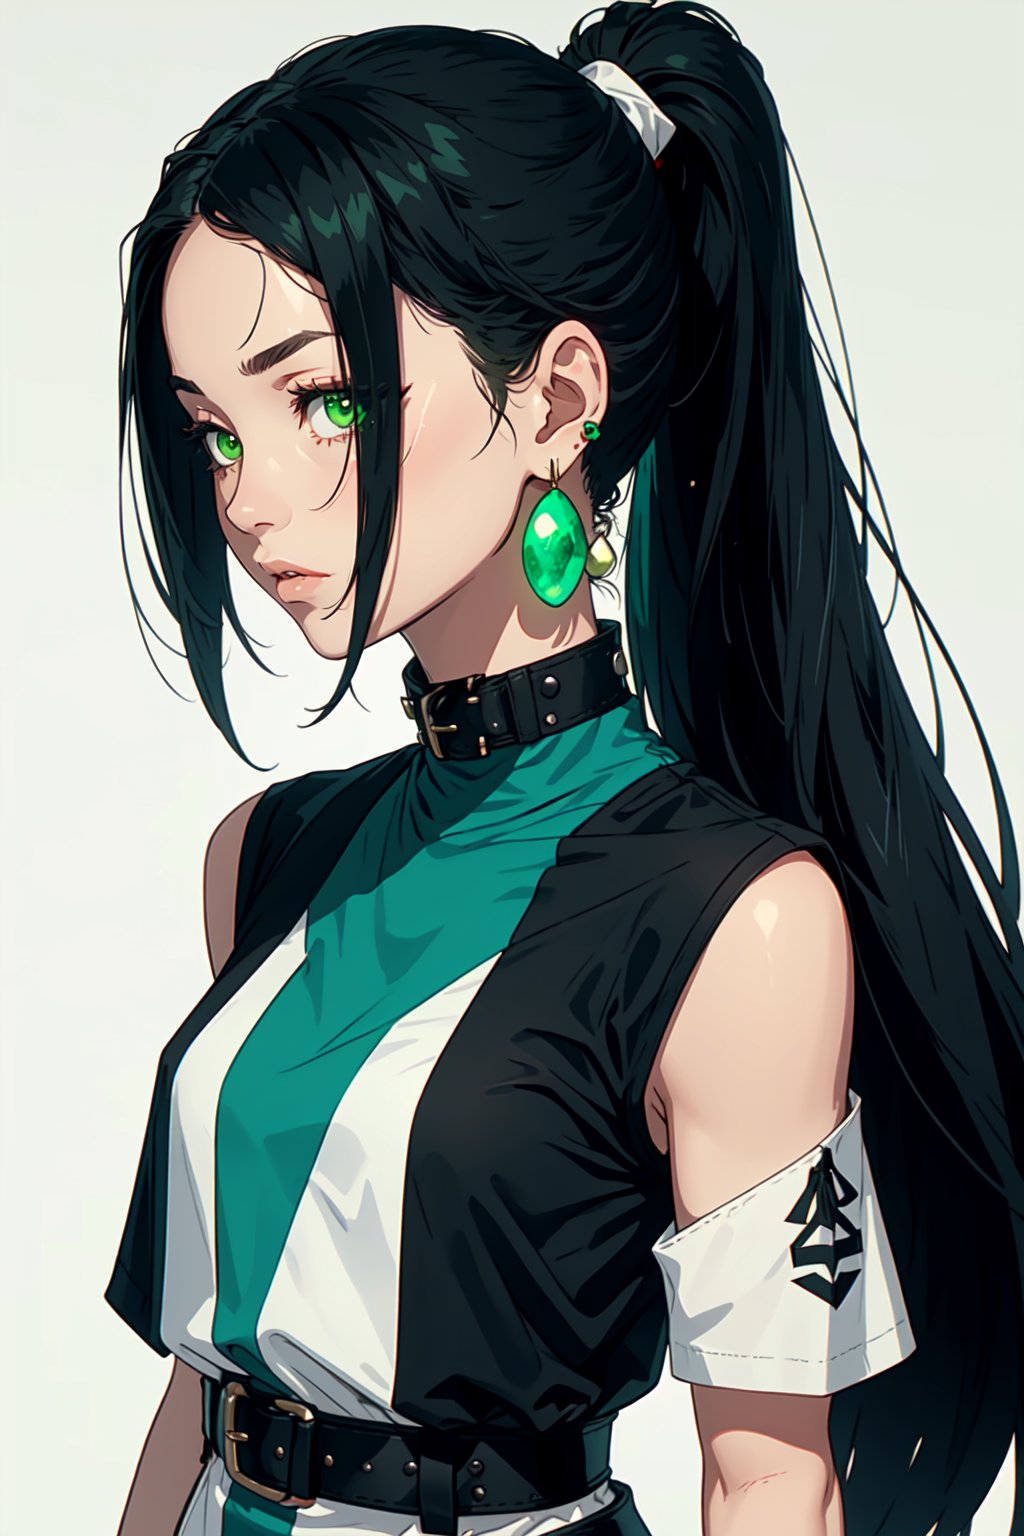 The woman has fair skin and appears tall with very long black hair styled in a ponytail. Her inner clothing is black, while her outer clothing is white and looser. Additionally, she wears green as a collar, belt, and design on her dress. As for accessories, she wears green orbs around her lower body and smaller ones as earrings